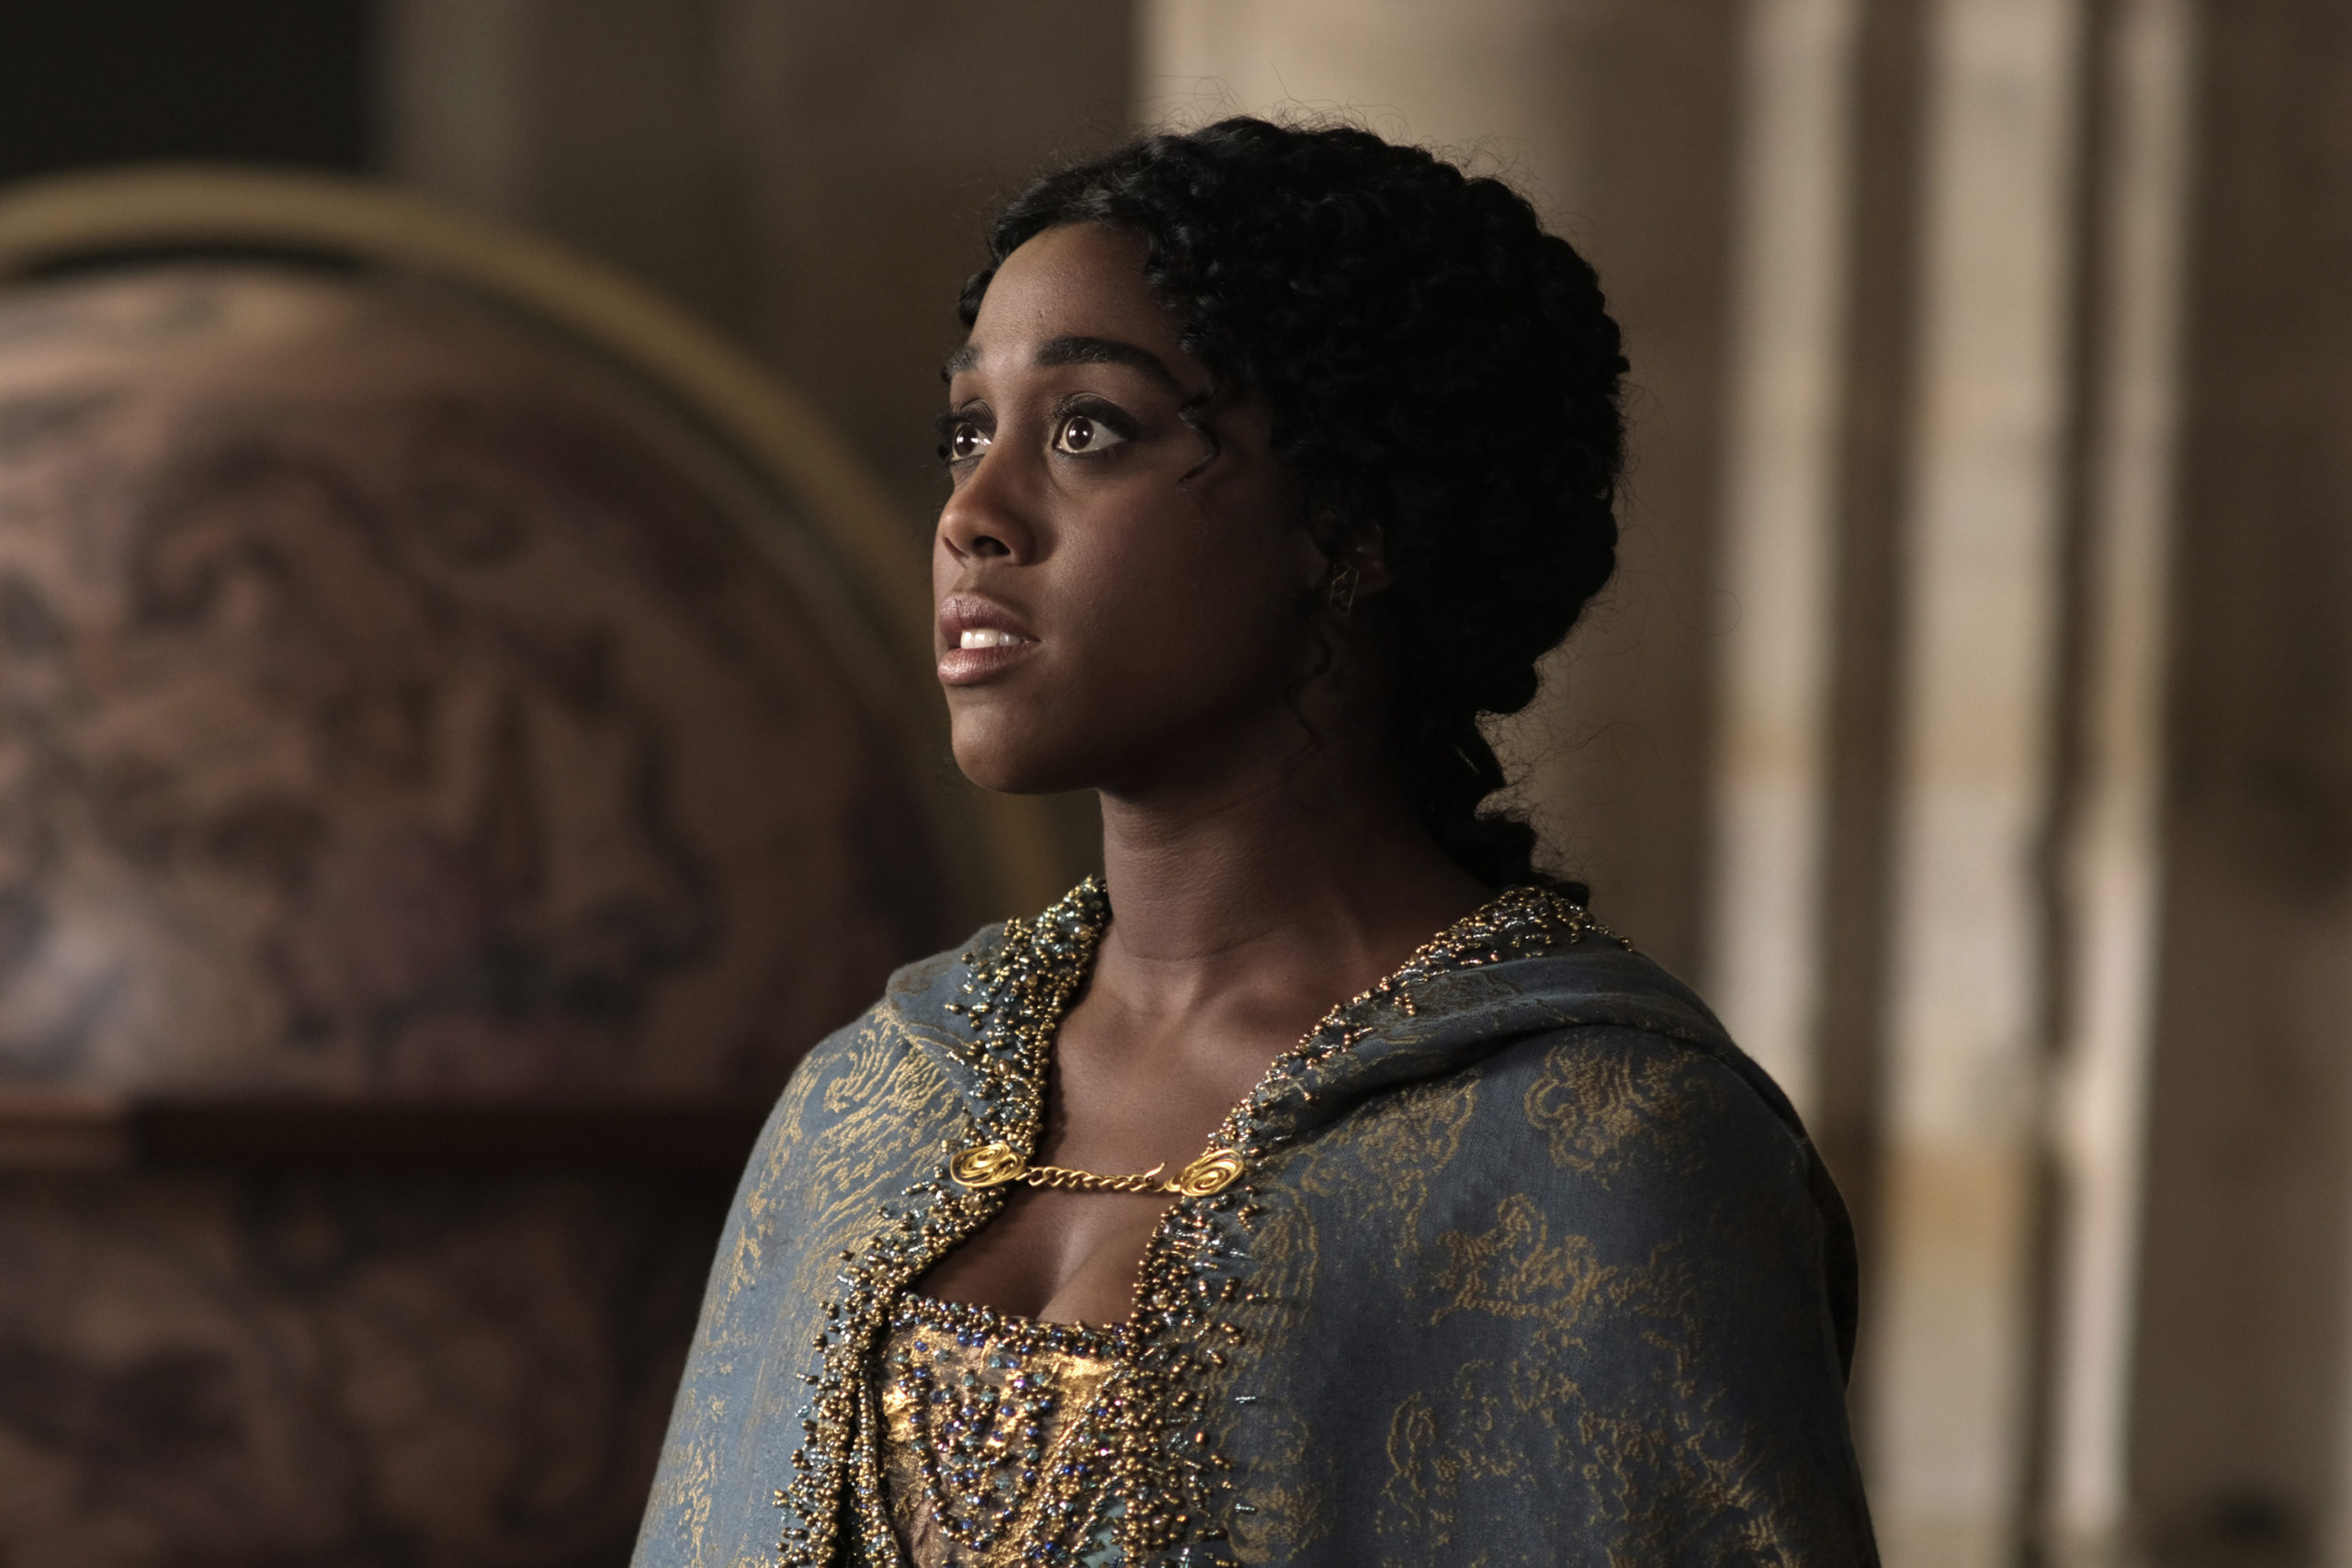 Still Star Crossed Finally Thankfully Ends With Something Wicked This Way Comes Black Girl Nerds